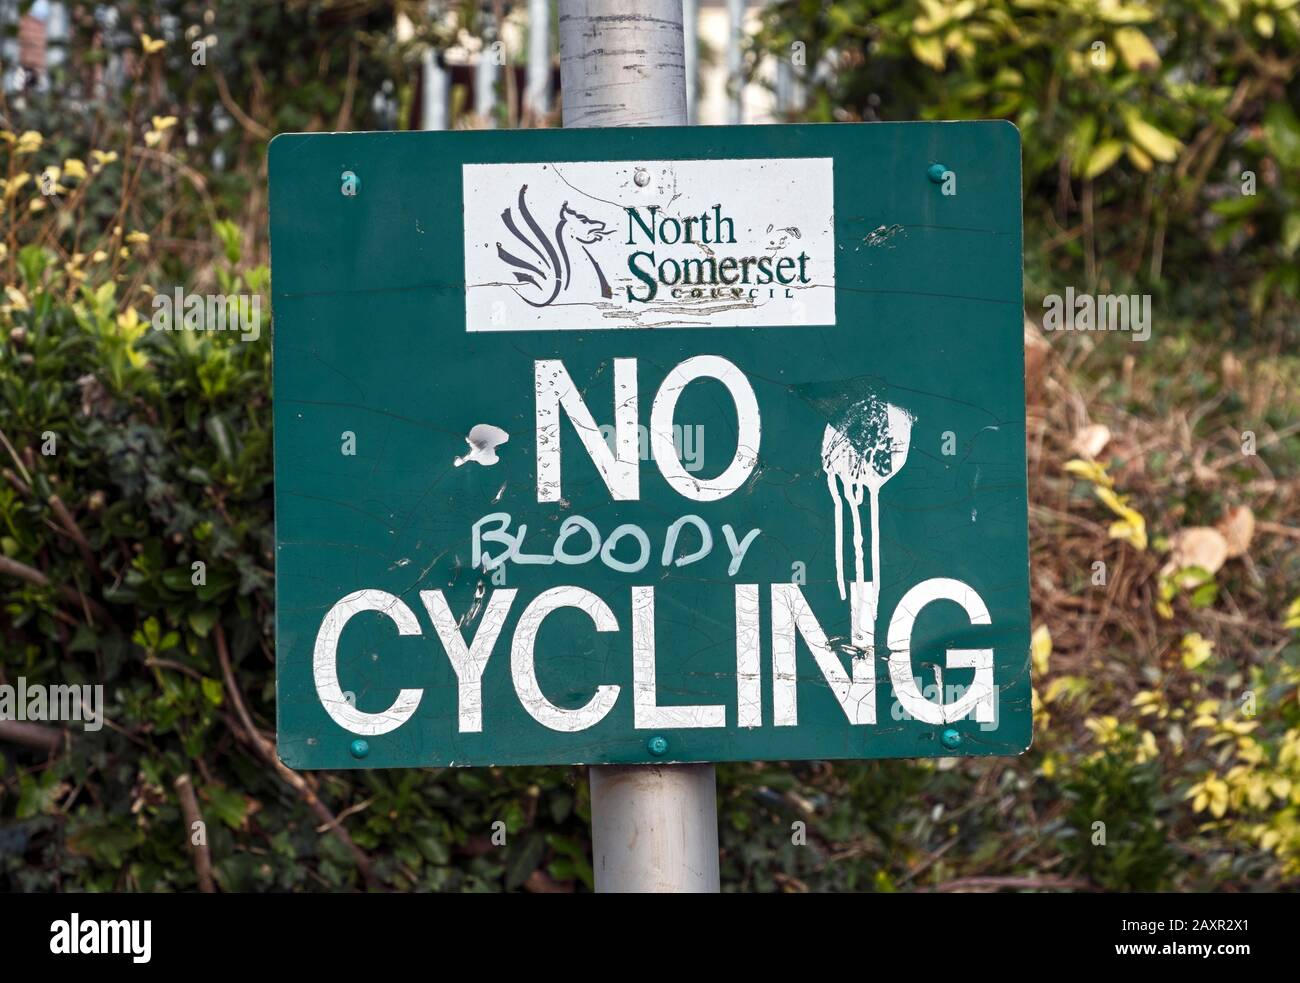 A battered, sign forbidding cycling in Ashcombe Park, Weston-super-Mare, UK which has been altered to read “NO BLOODY CYCLING” Stock Photo